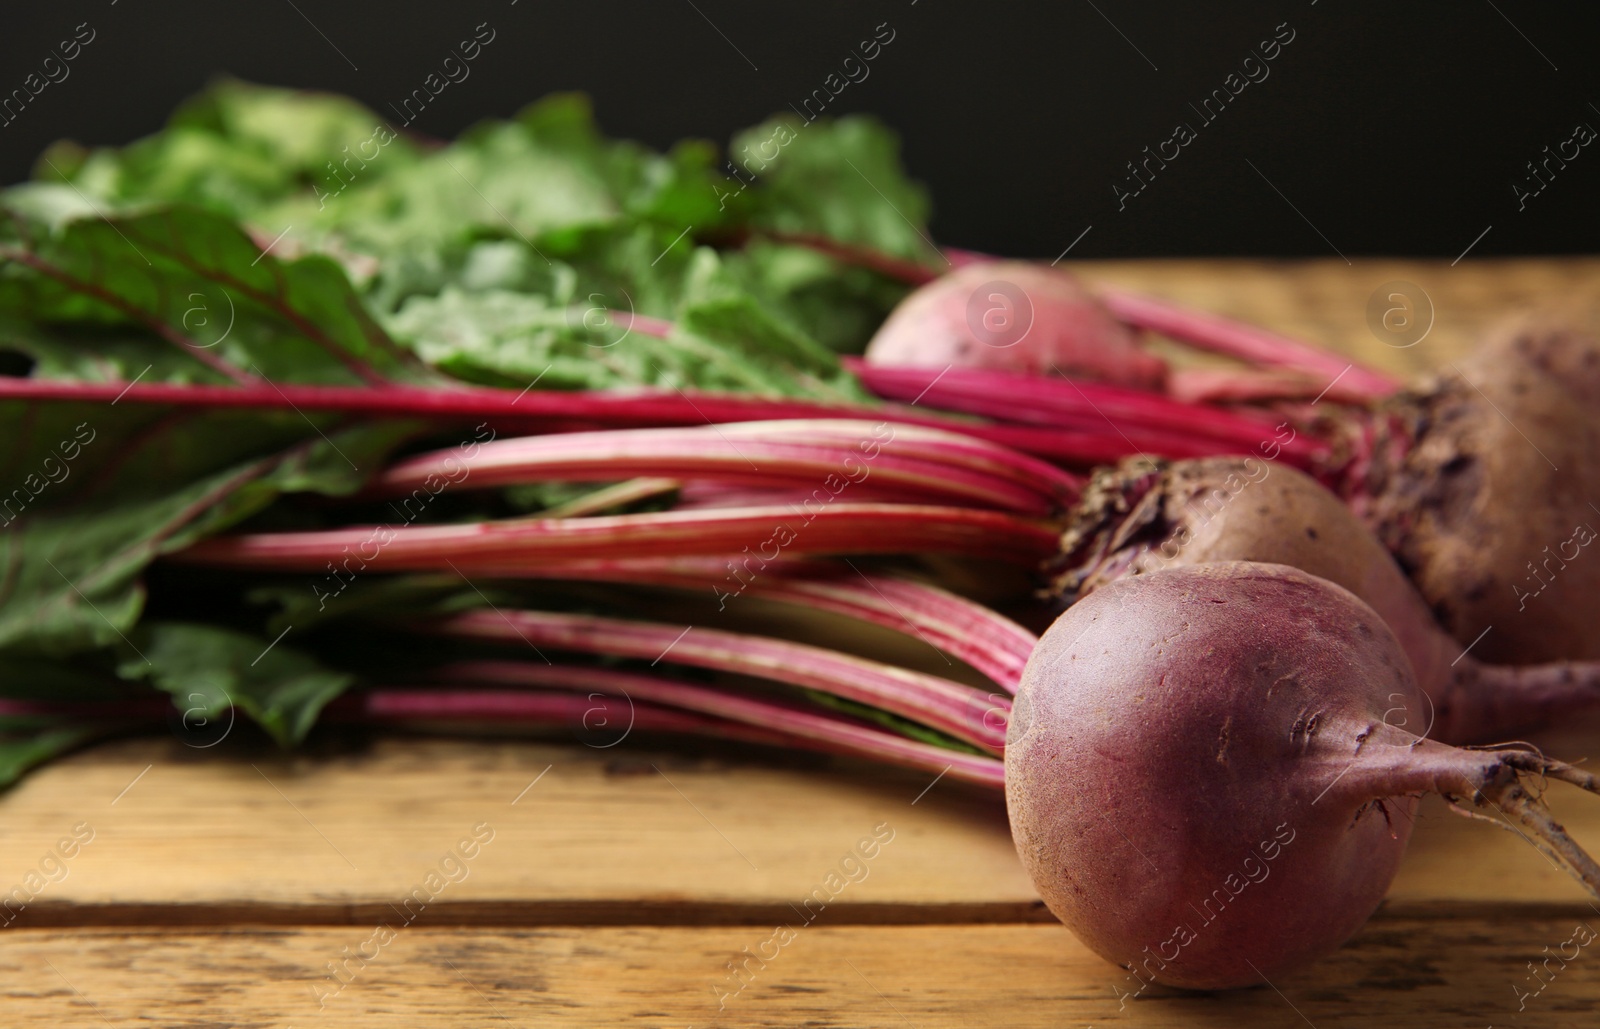 Photo of Bunch of fresh beets with leaves on wooden table against black background. Space for text